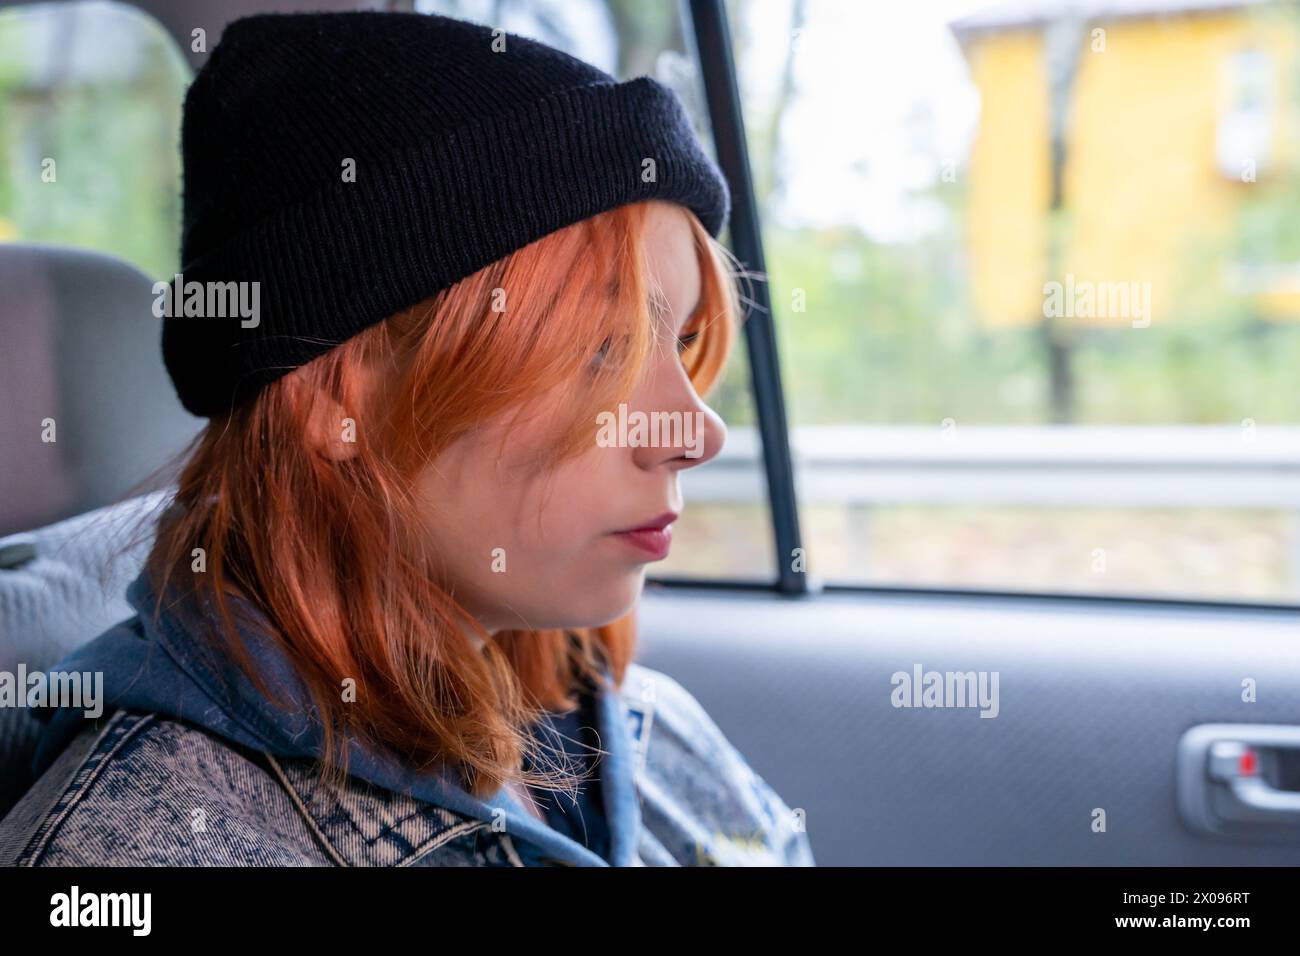 A pretty girl with pink hair in a black knitted hat in the back seat of a car, looking out the window, she is immersed in thoughts about her future, a Stock Photo